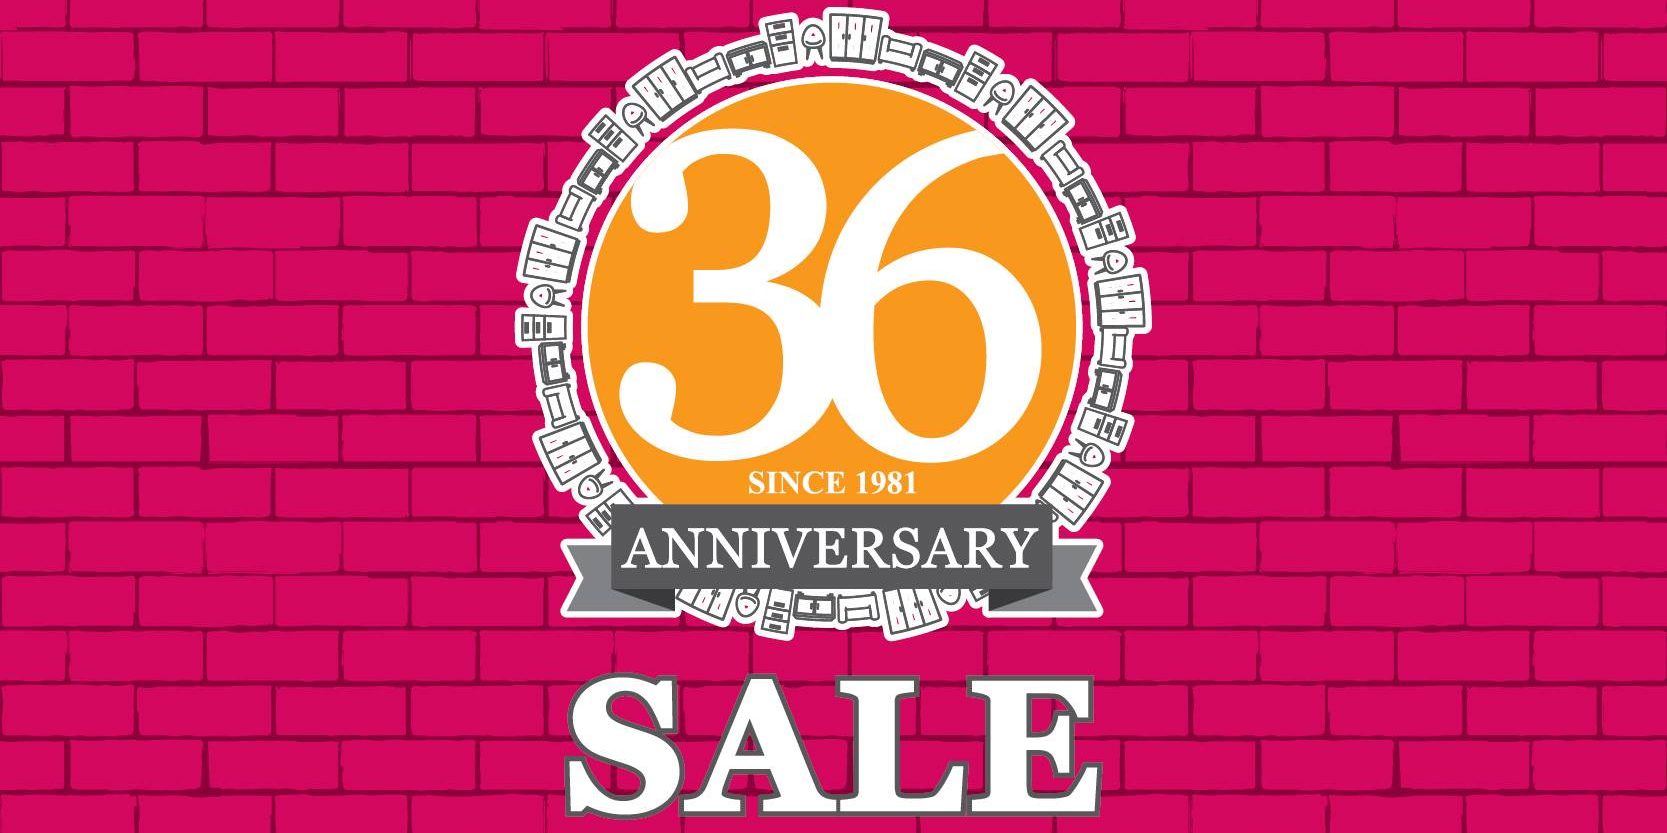 Star Living Singapore 36 Anniversary We Pay You Shop Promotion 29 Apr – 14 May 2017